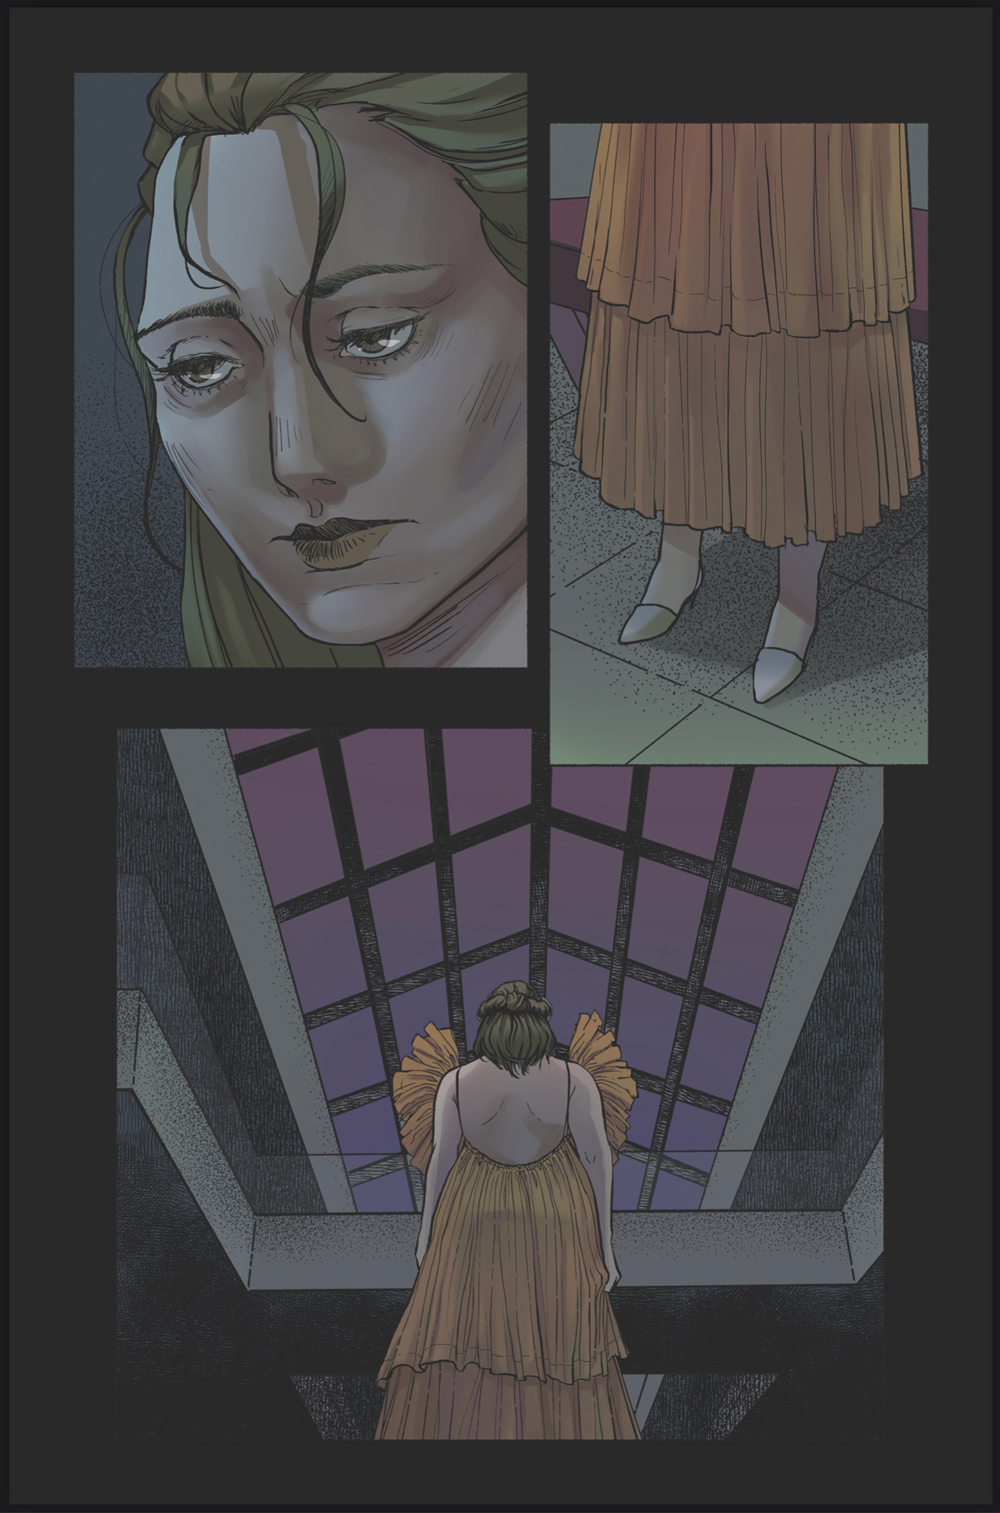 Page for "Grieving Mall" by graphic novelist R. Alan Brooks and artist Sarah Menzel Trapl.